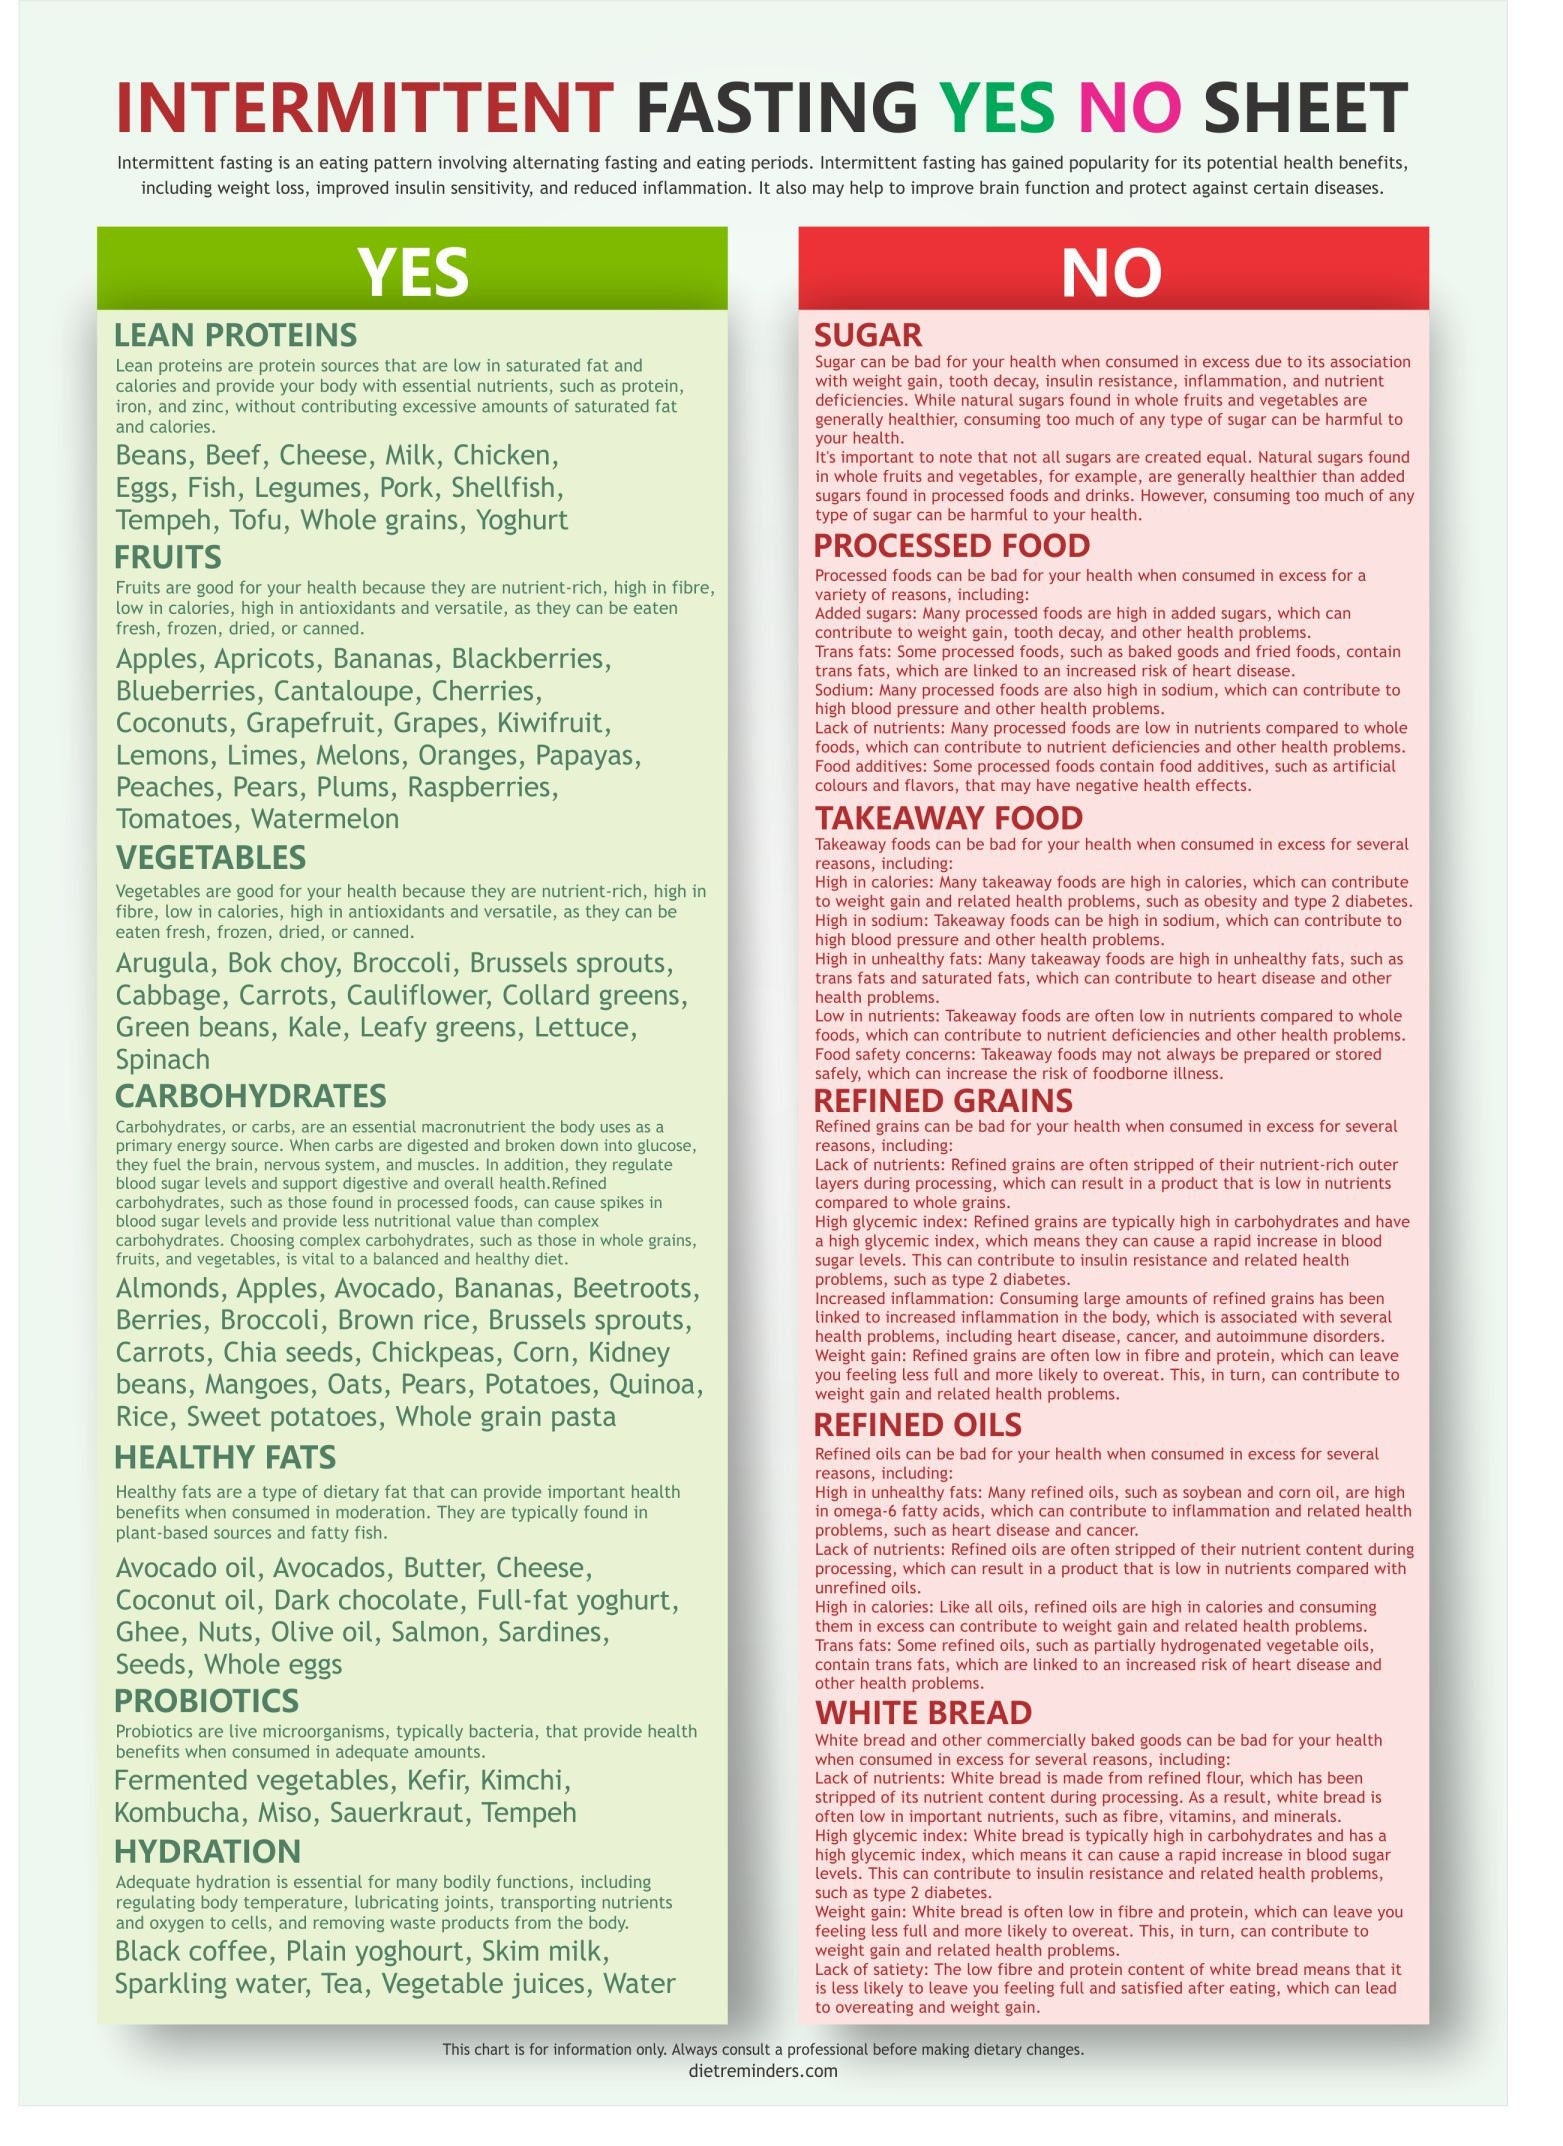 PALEO Diet Foods List And Chart, Yes No List, Colour-coded, Easy To ...